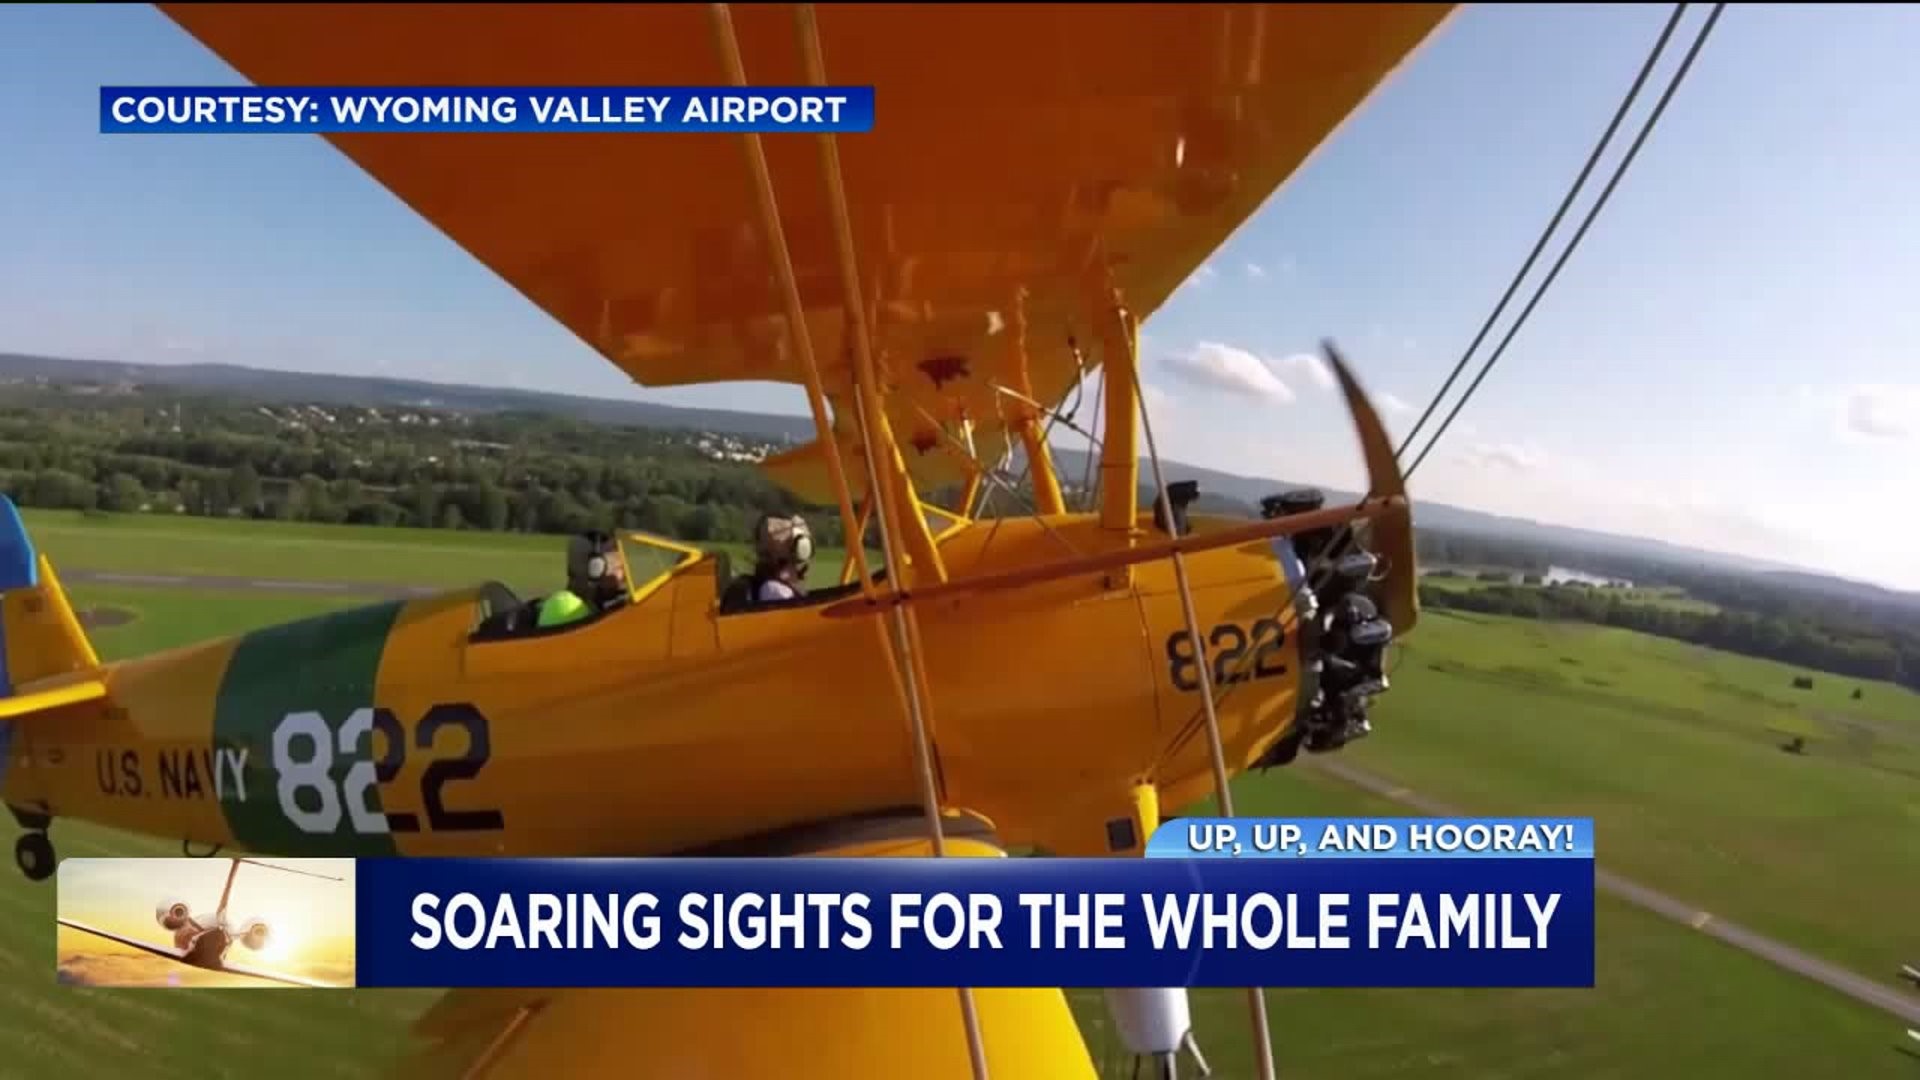 Soaring Sights for the Whole Family